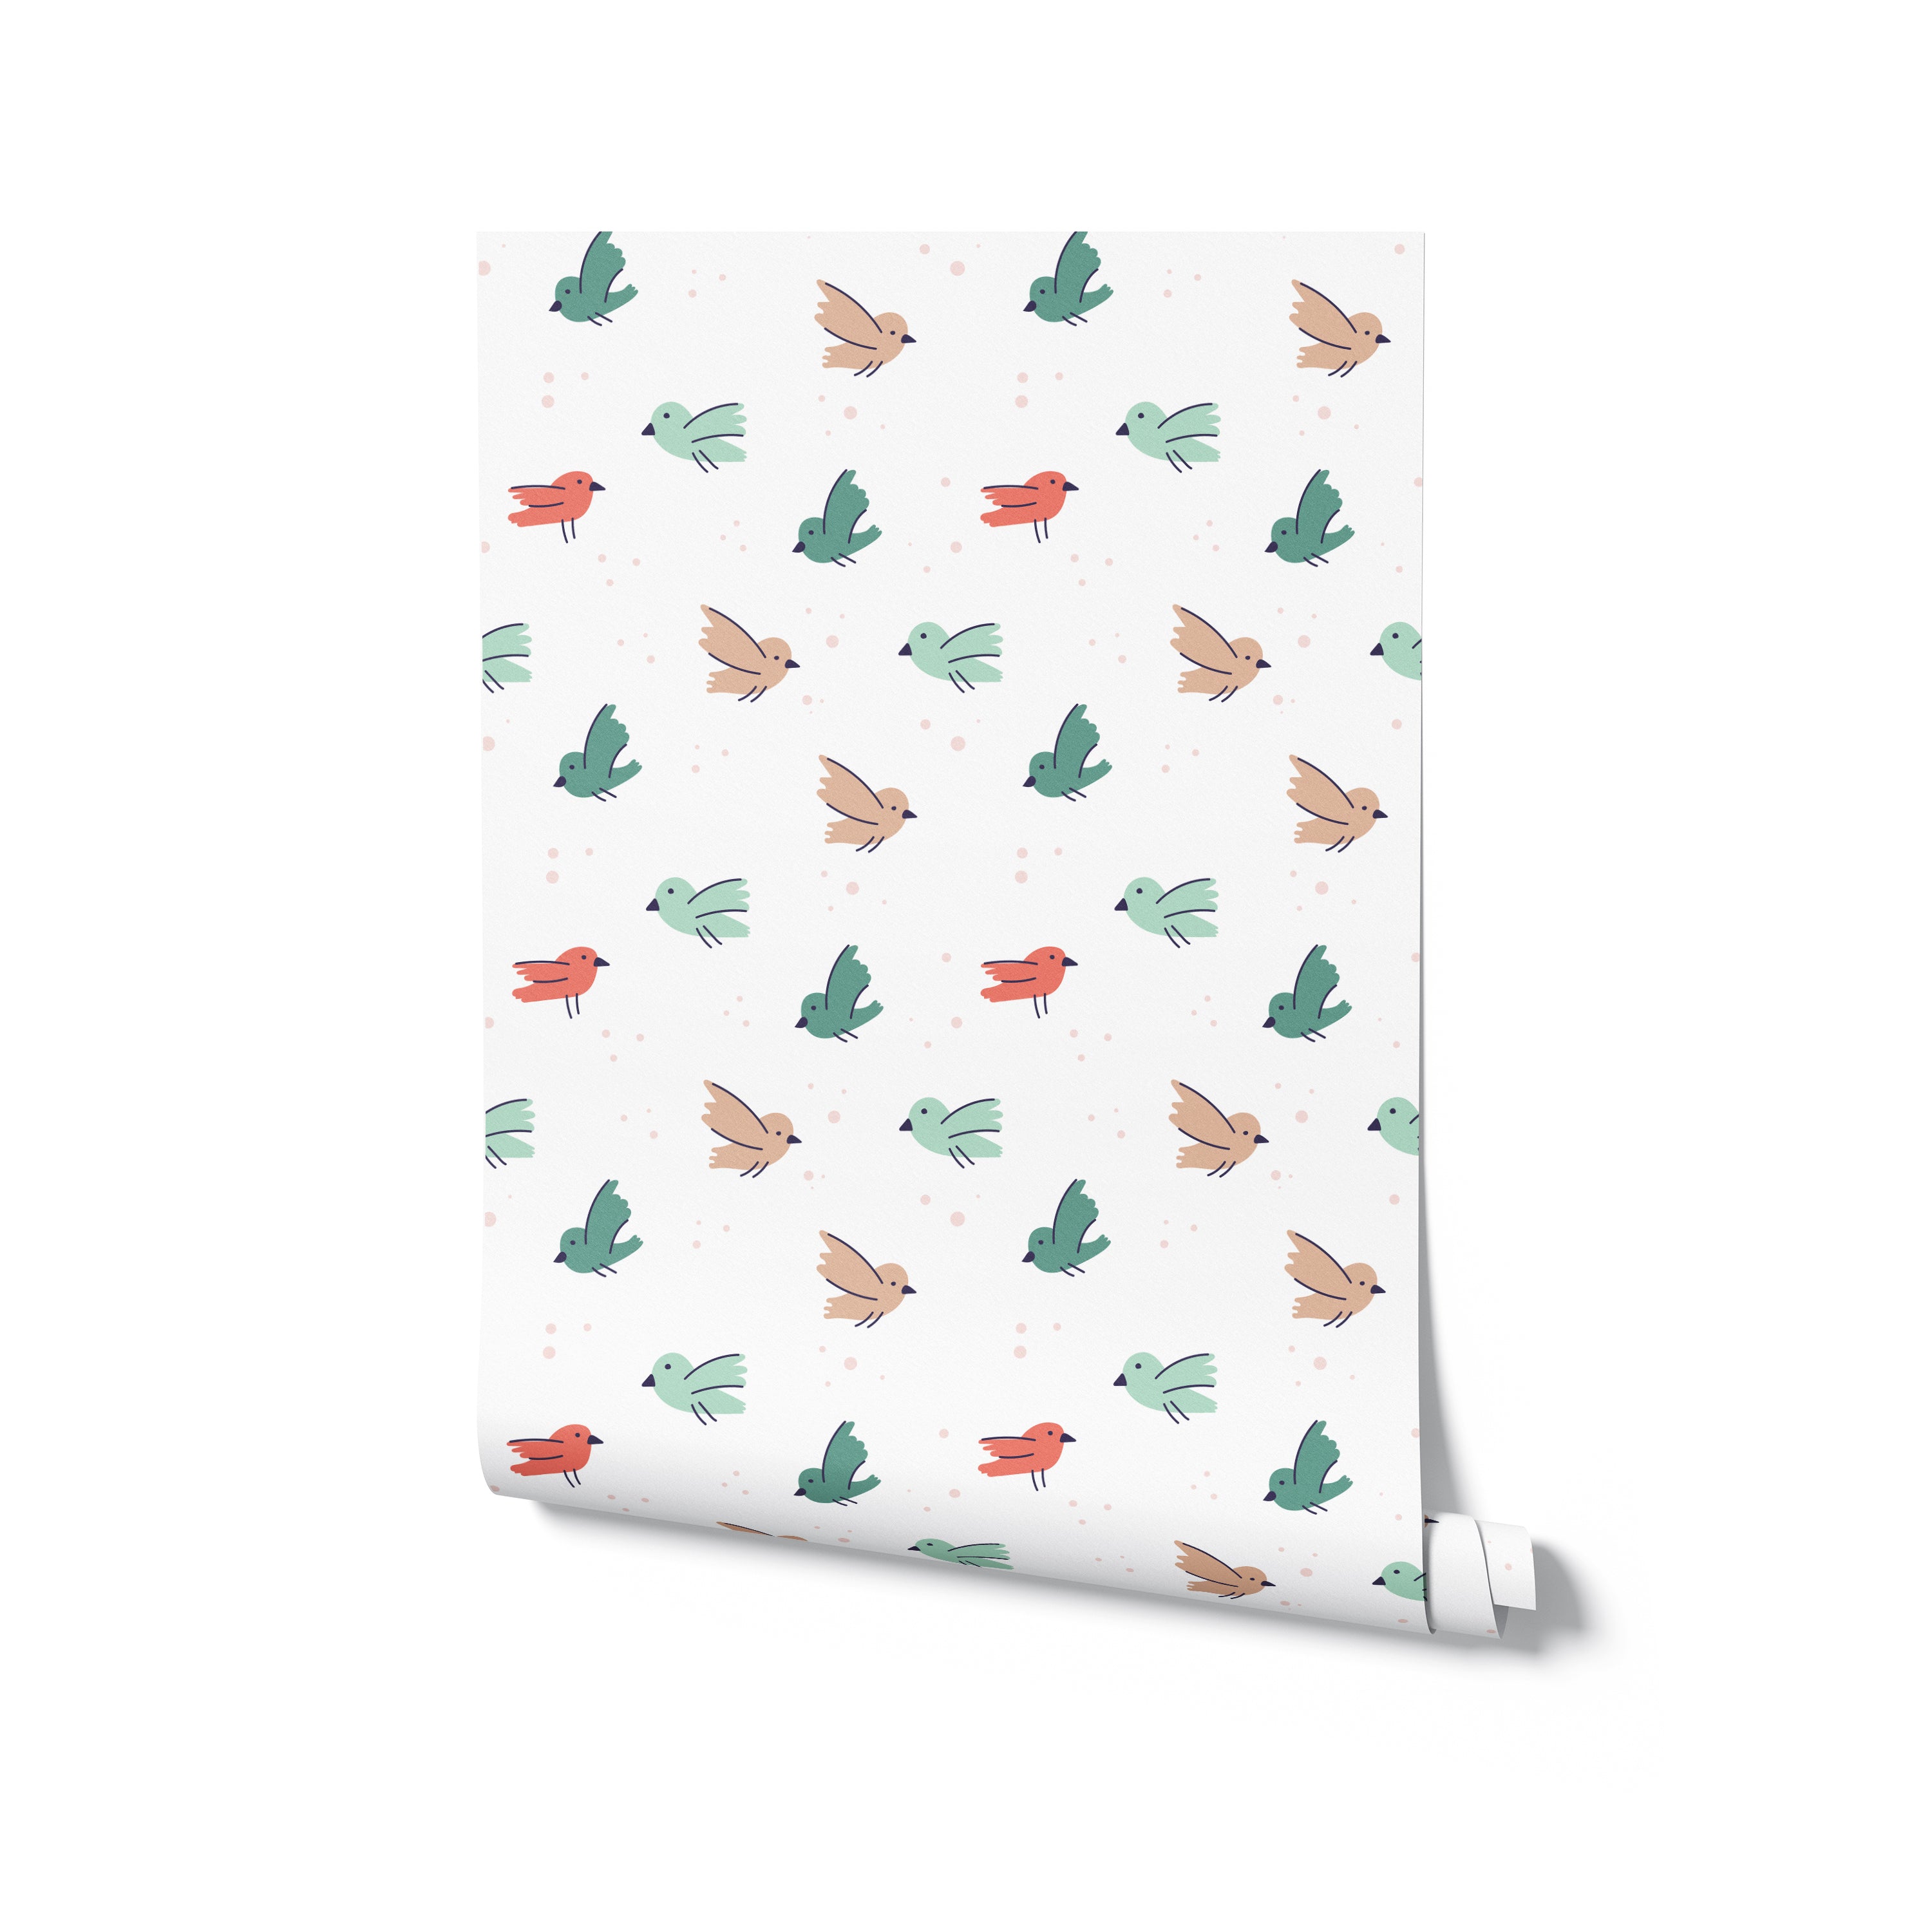 Roll of baby bird nursery wallpaper showcasing colorful bird illustrations on a light speckled background.